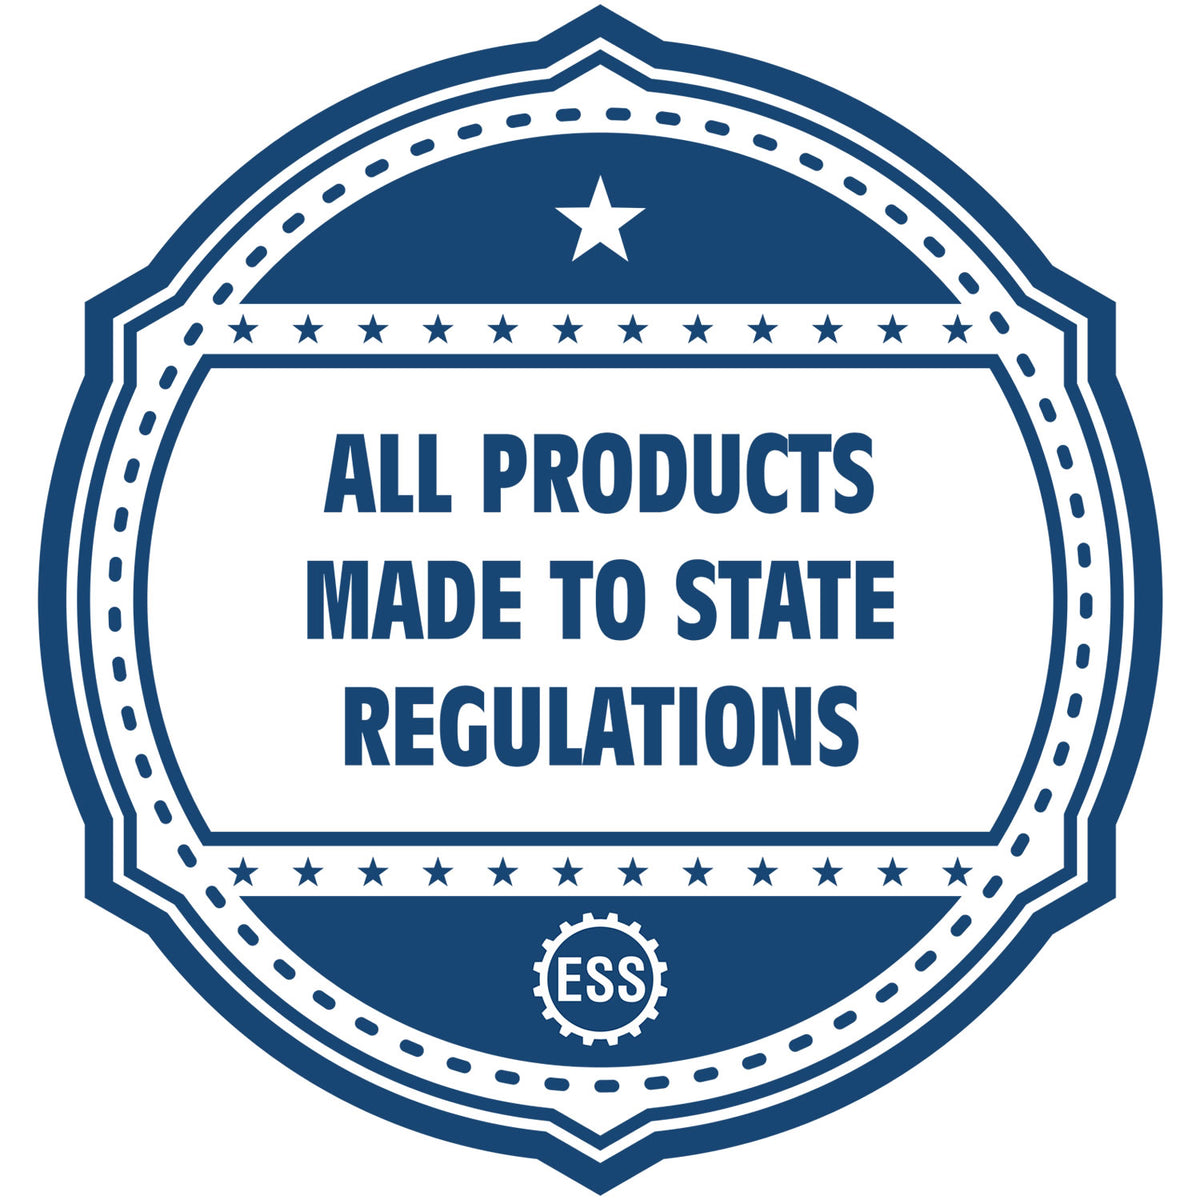 A blue icon or badge for the Heavy Duty Cast Iron Wisconsin Geologist Seal Embosser showing that this product is made in compliance with state regulations.